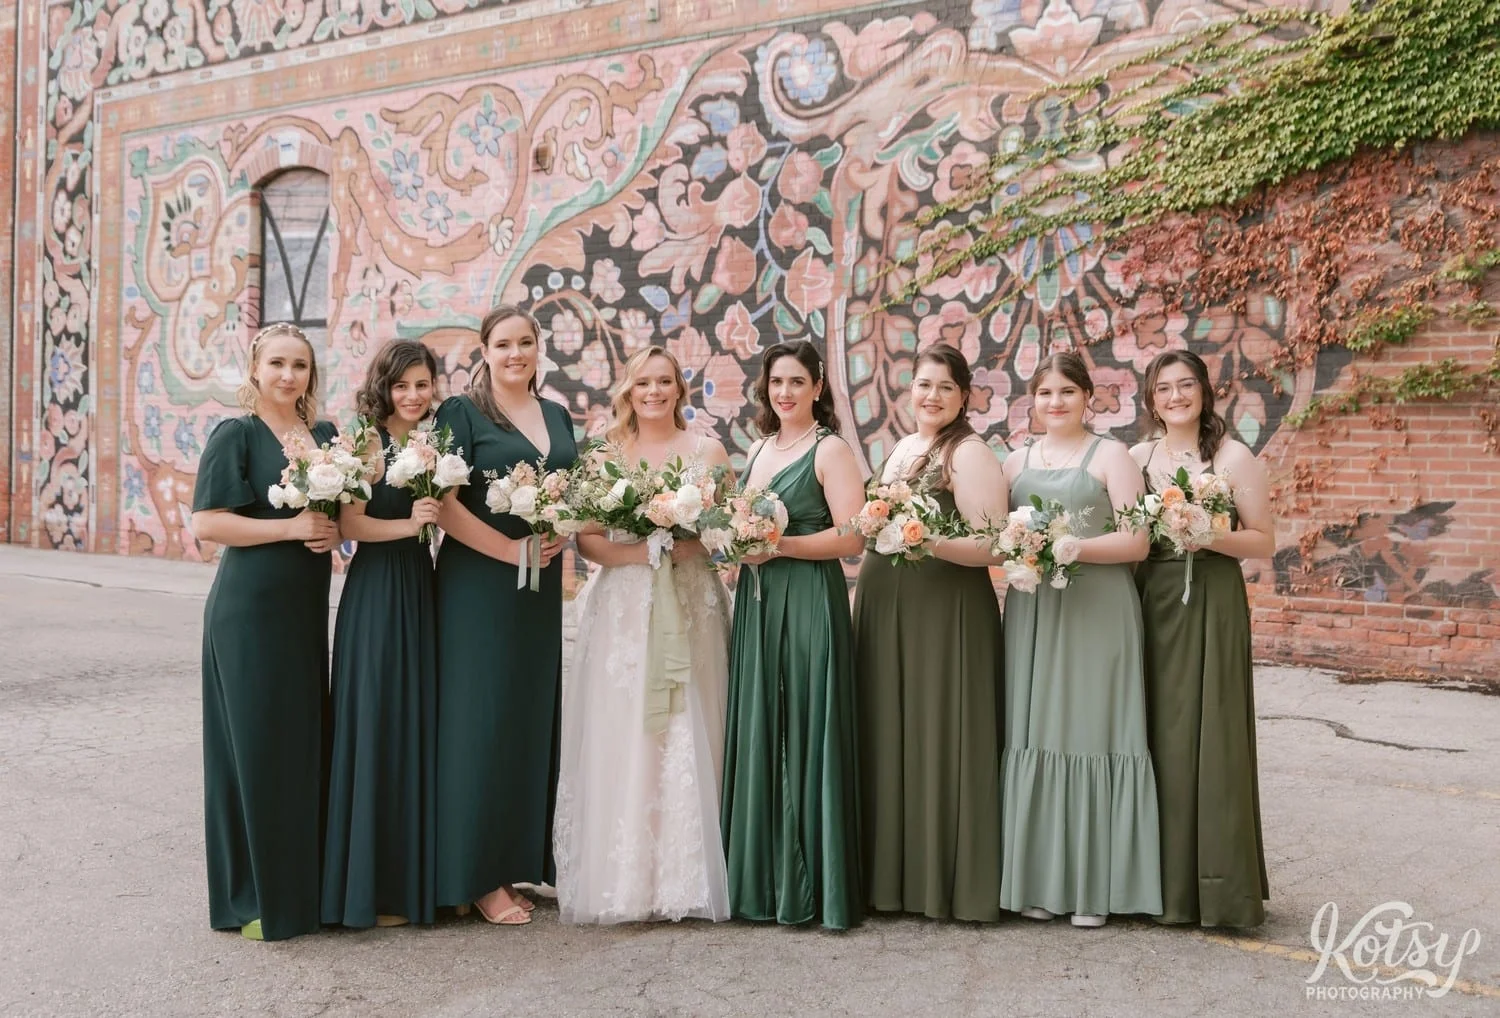 A bride wearing a white bridal gown poses with her bridesmaids holding bouquets of flowers in front of a mural outside the carpet factory in front of a colourful mural in Toronto, Canada